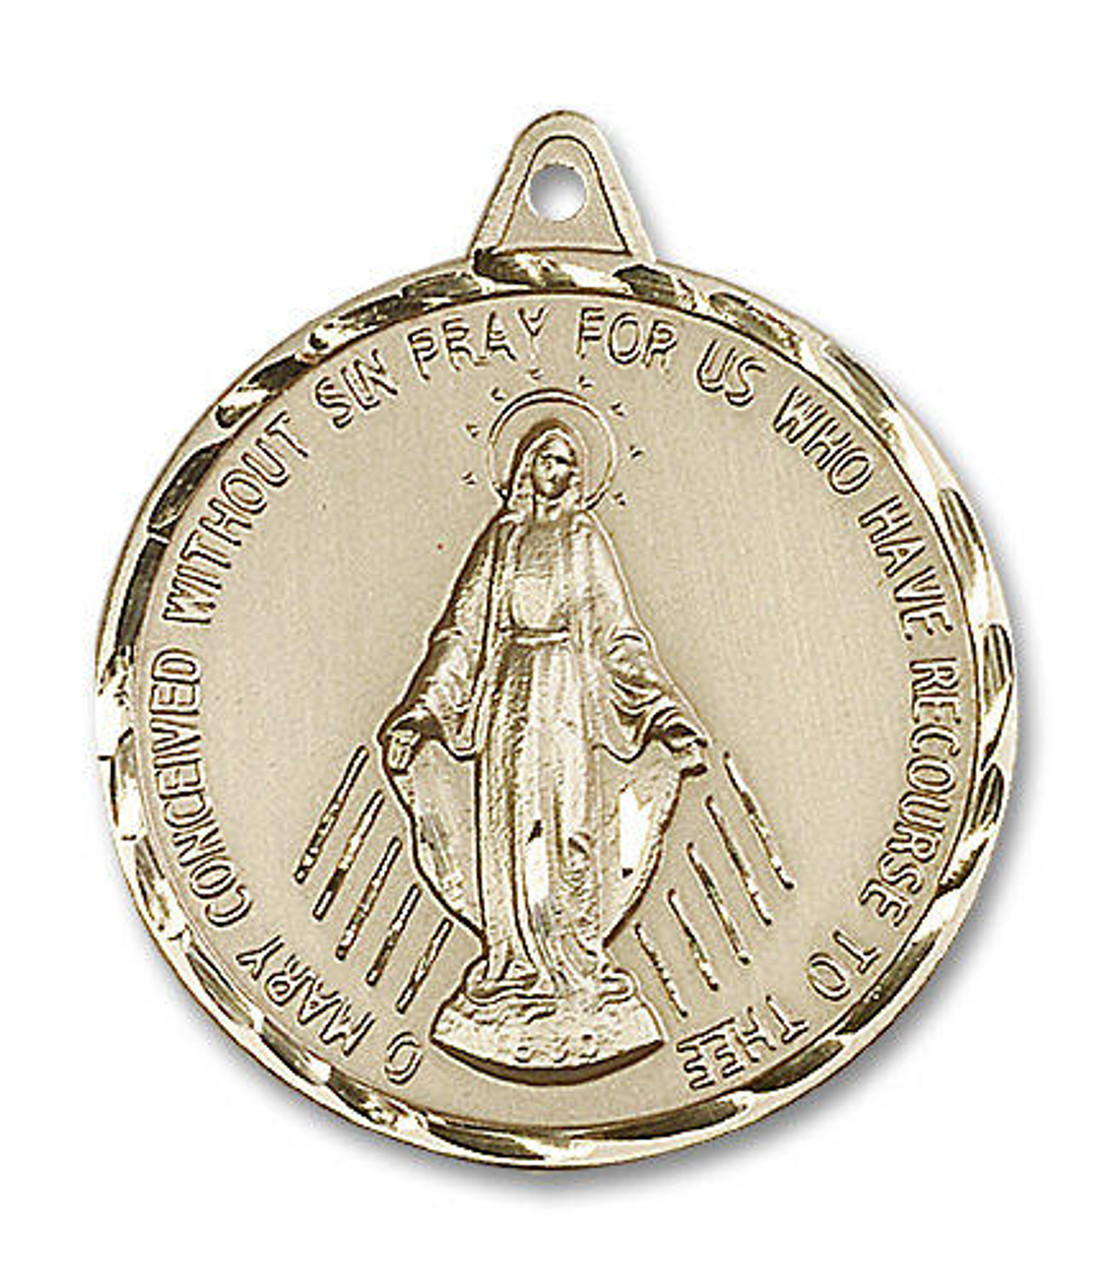 Extra Large Miraculous Medal - 14kt Gold 1 3/8 x 1 1/4 Round Pendant  (0203M)